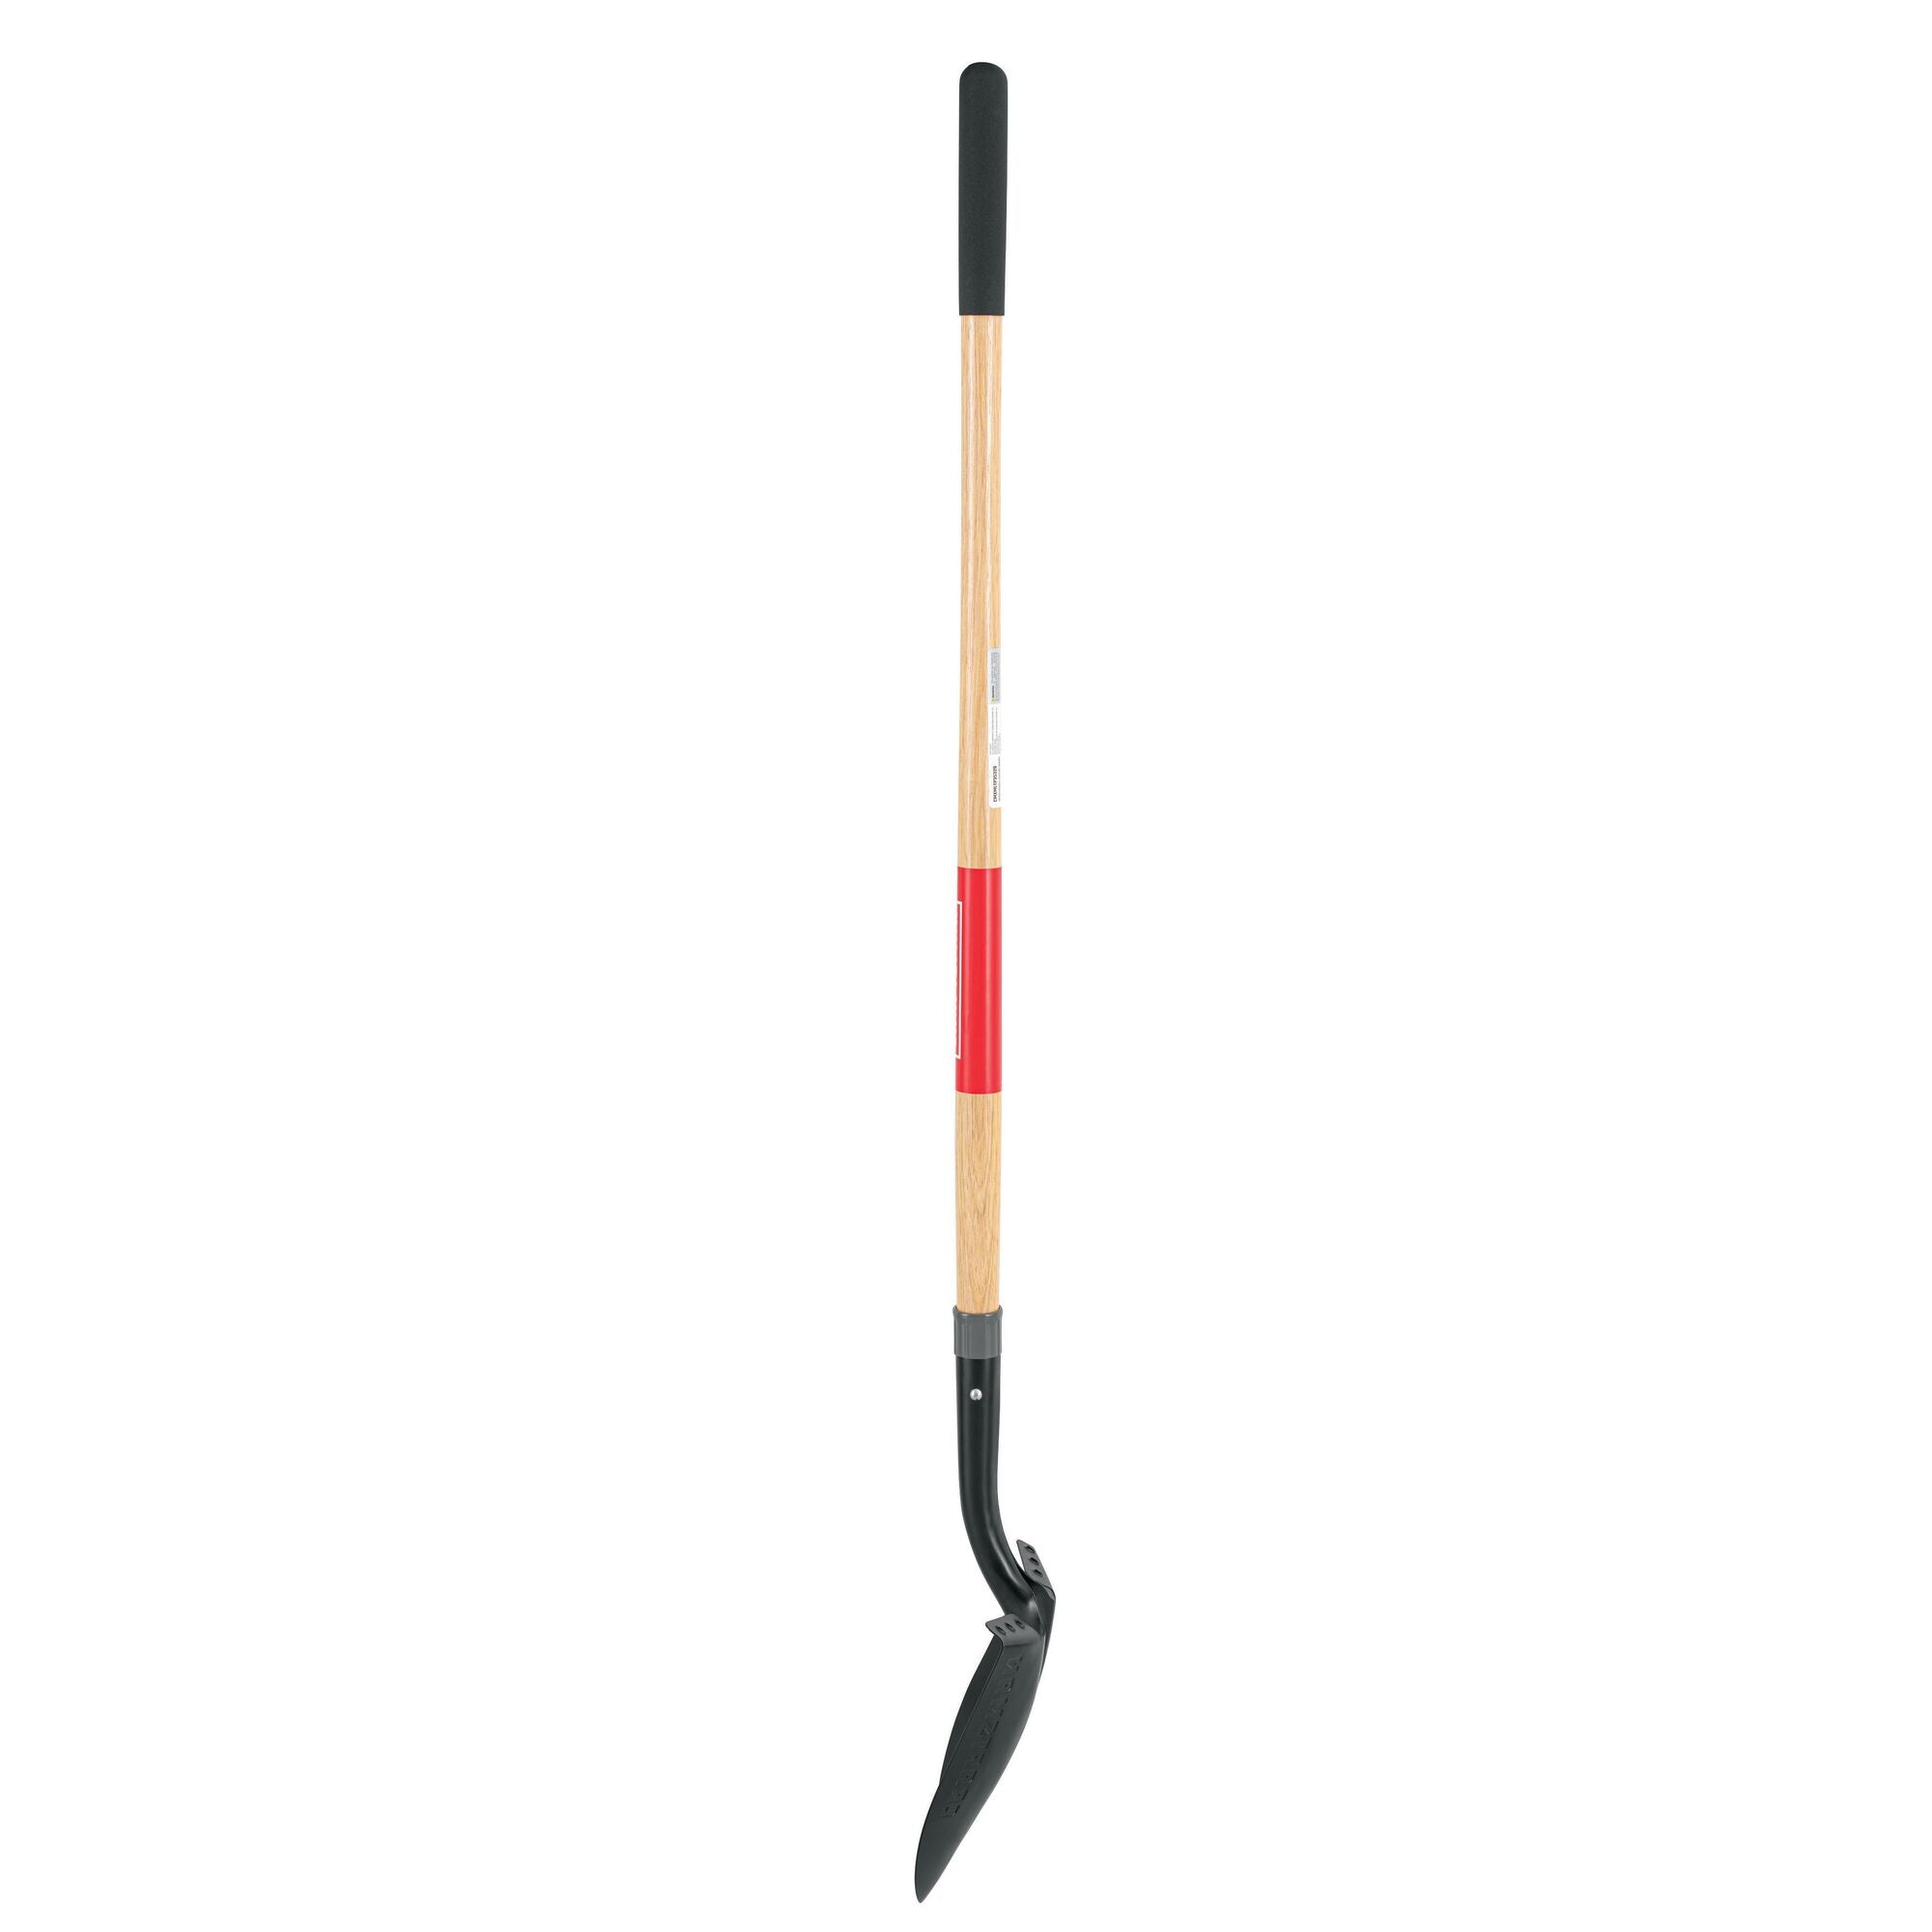 Long Handle Cleated Step Digging Shovel with wood handle and cushion grip, left-facing